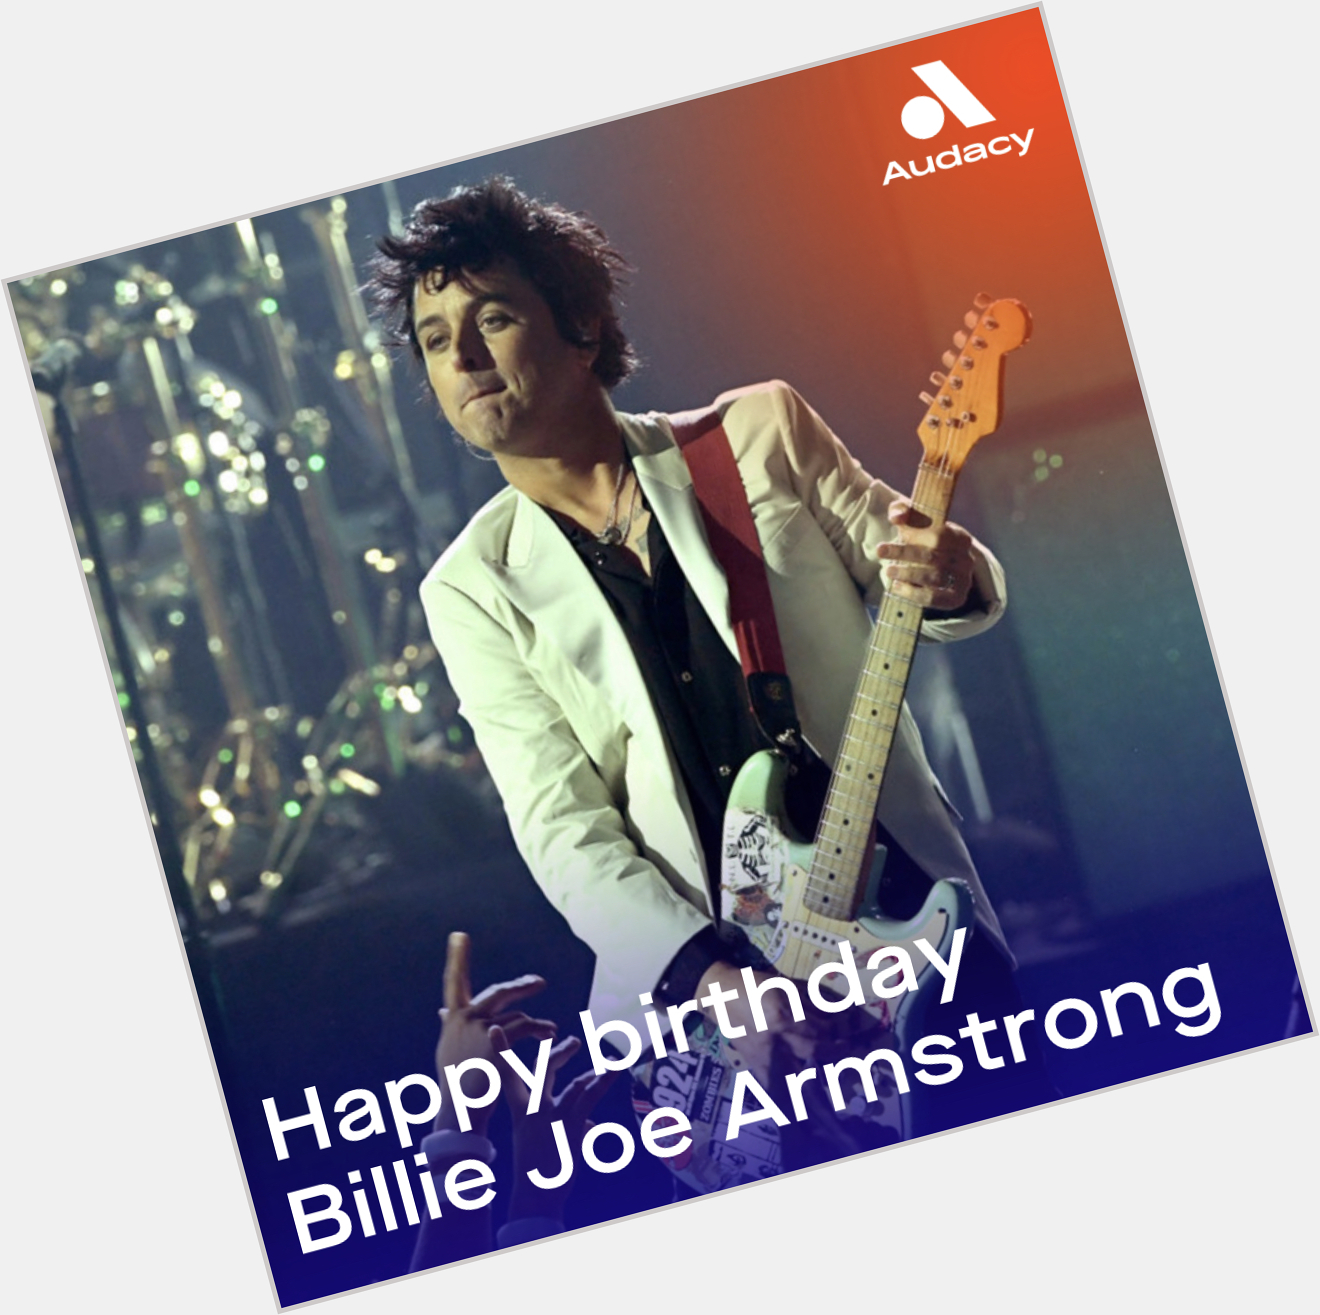 Wishing a happy 50th birthday to frontman, Billie Joe Armstrong 